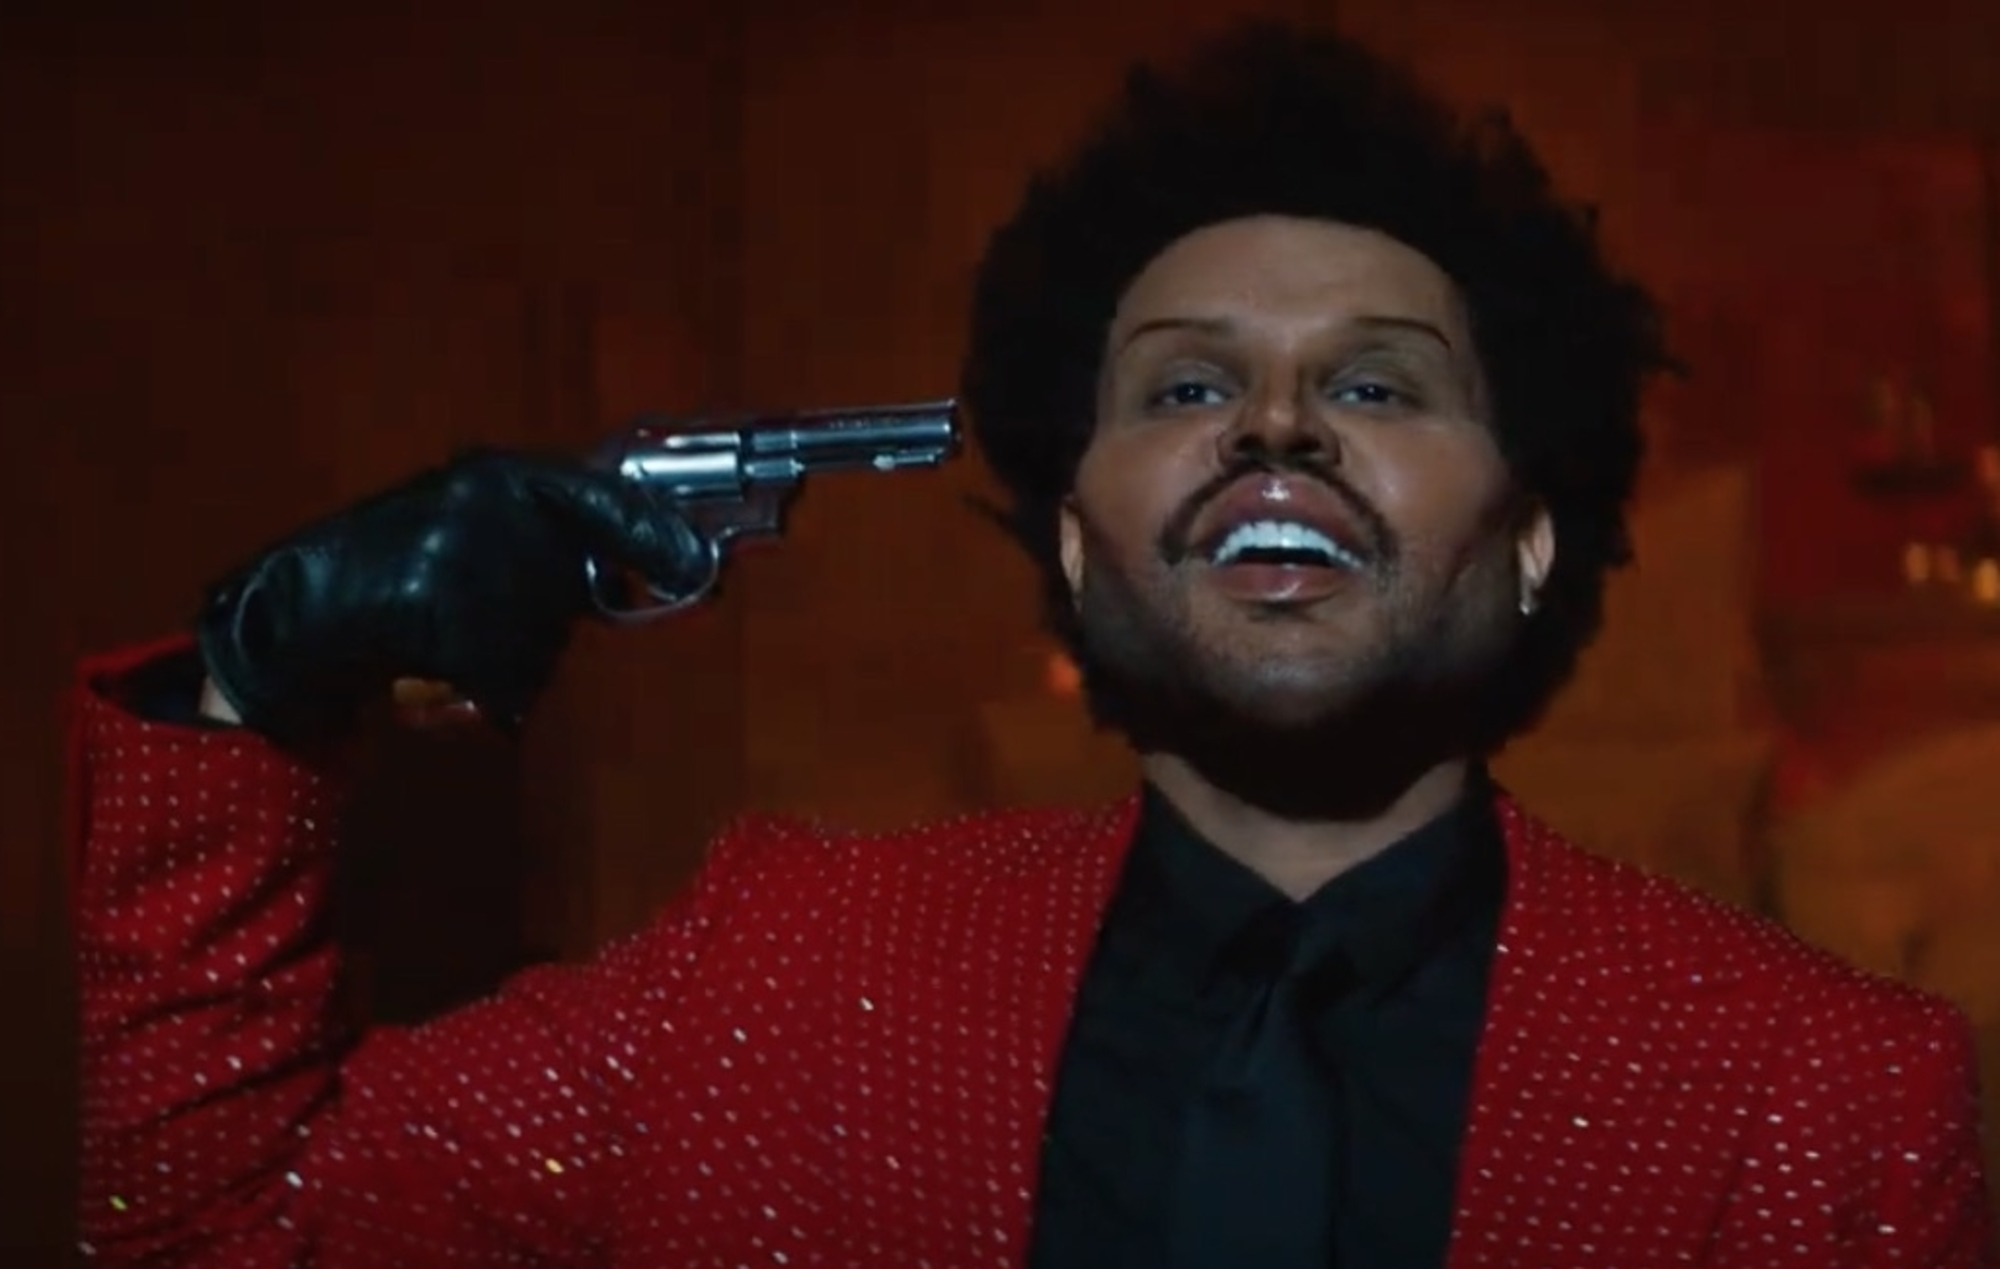 The Weeknd's fans think he's throwing shade at the Grammys in 'Save Your Tears' video